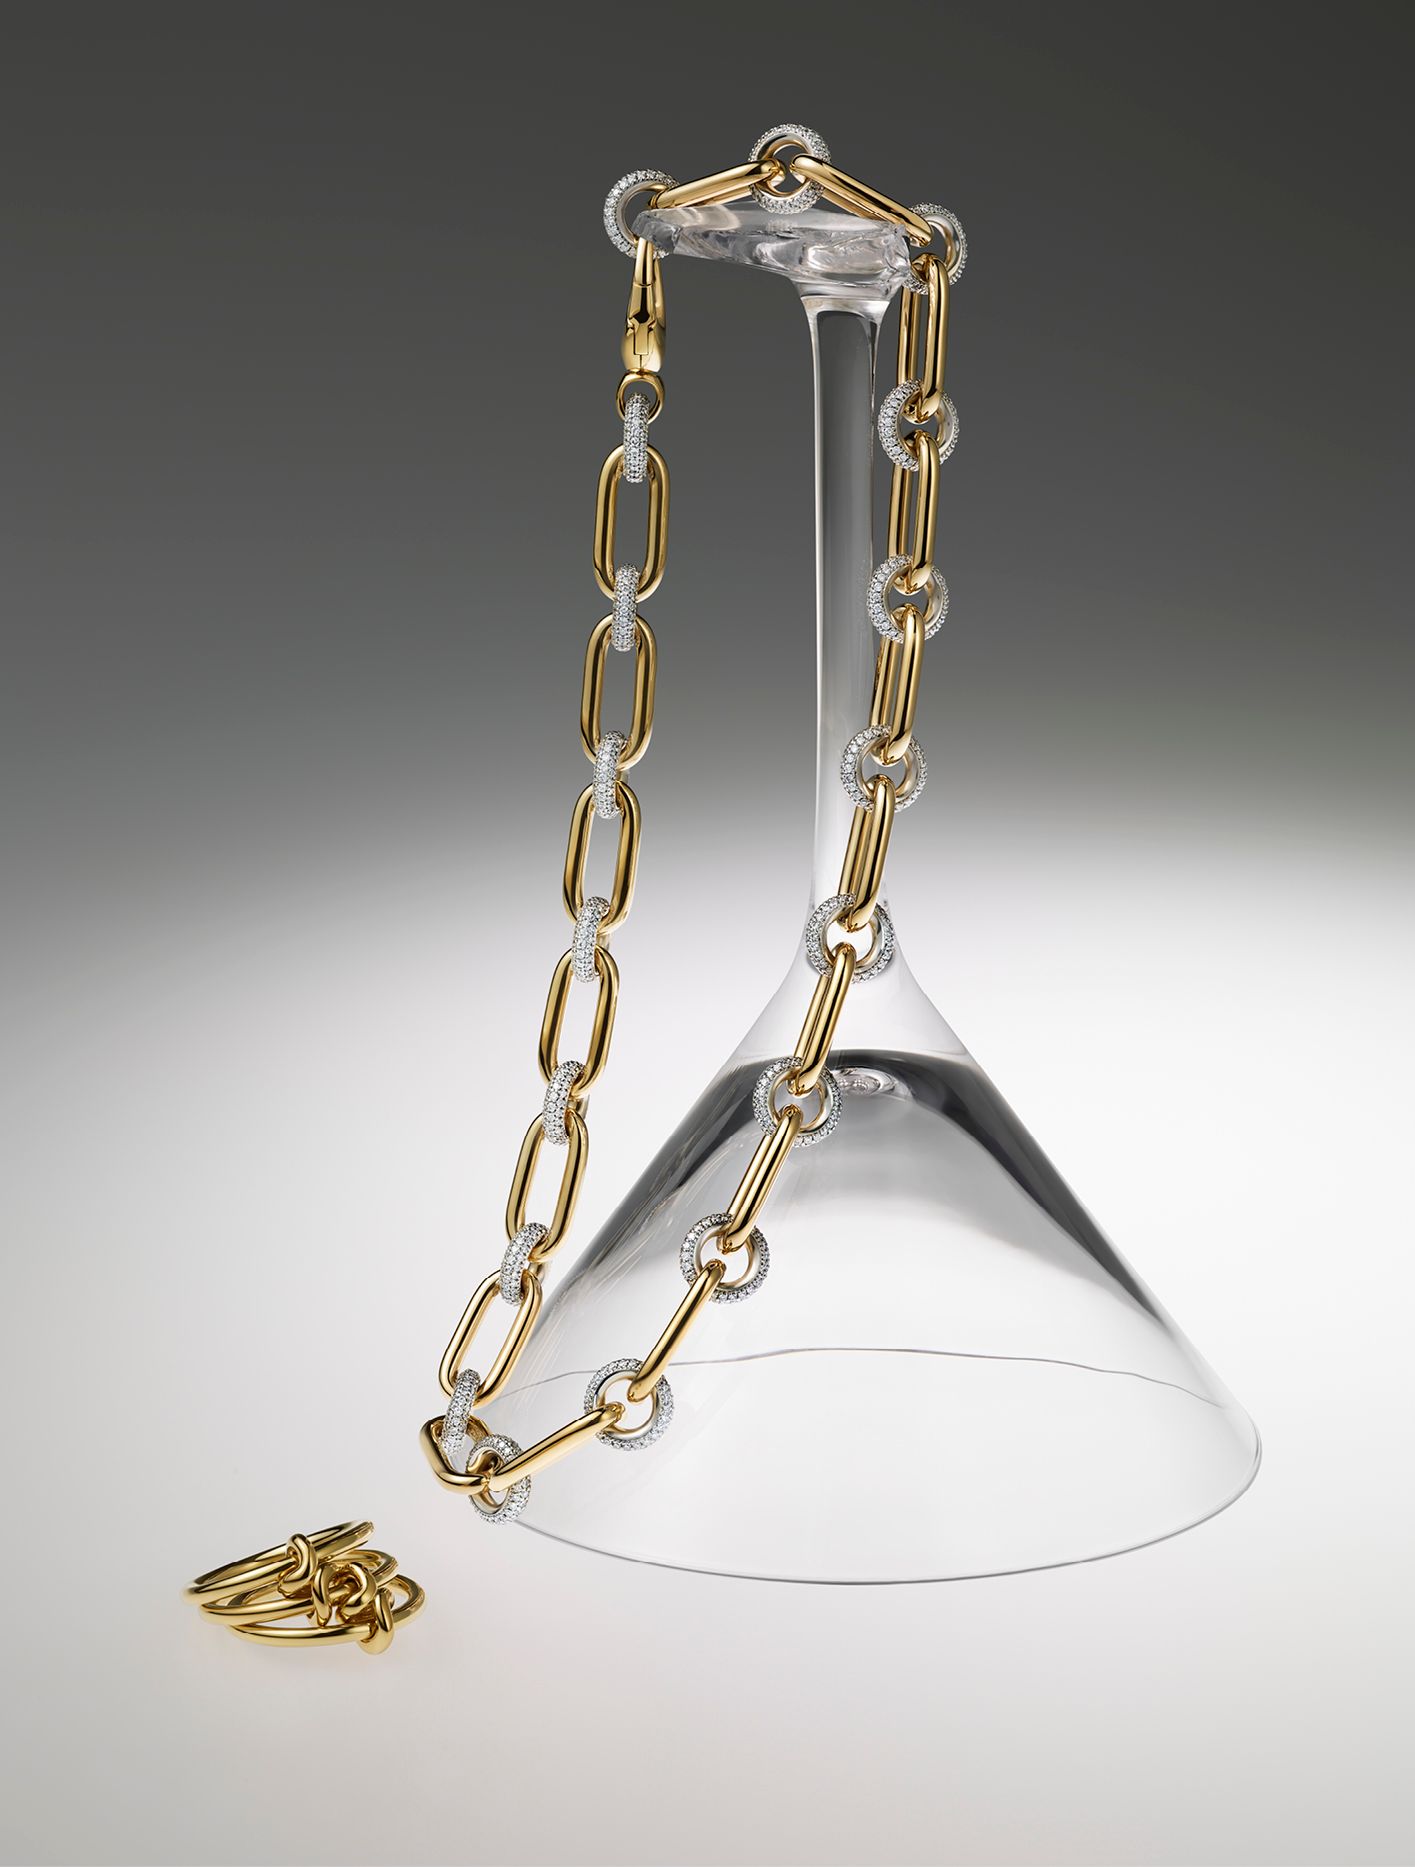 Pragnell Havana 5.4ct diamond chain necklace in 18ct yellow and white gold, £20,600, pragnell.co. uk; Annoushka Knuckle 14ct yellow gold transformable ring, £2,200, annoushka.com